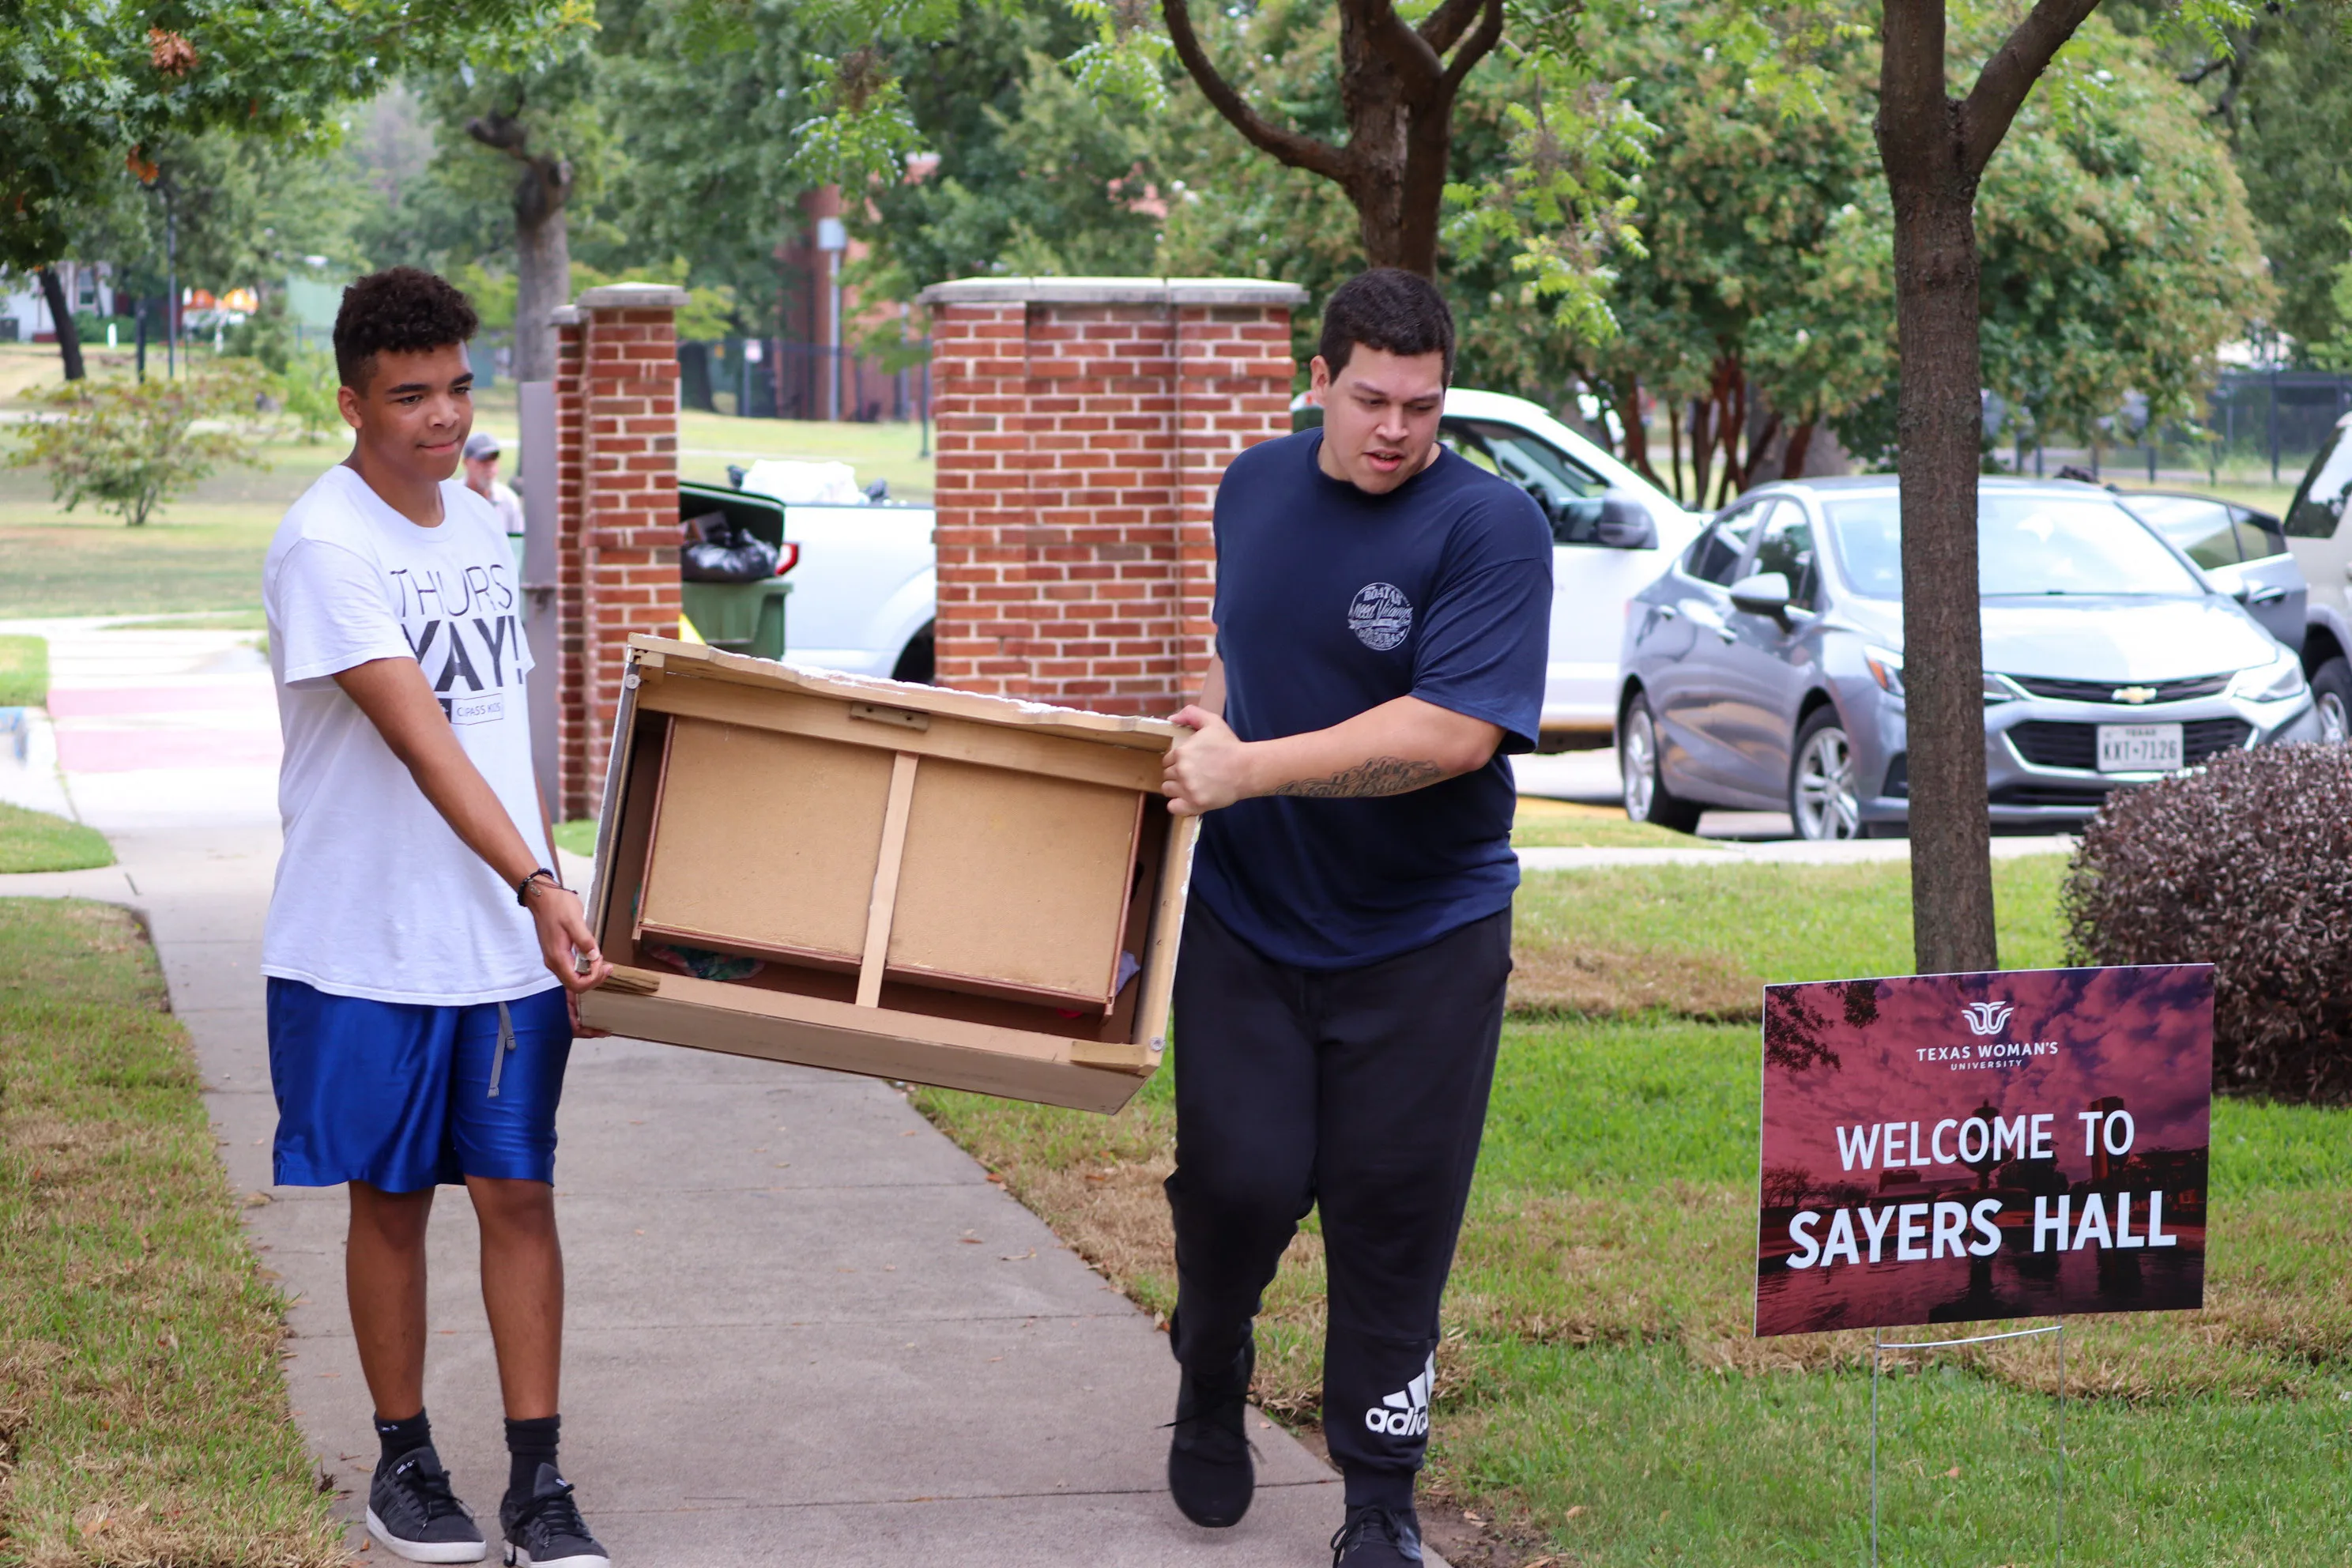 Two students transport a small dresser past a sign for Sayers Hall